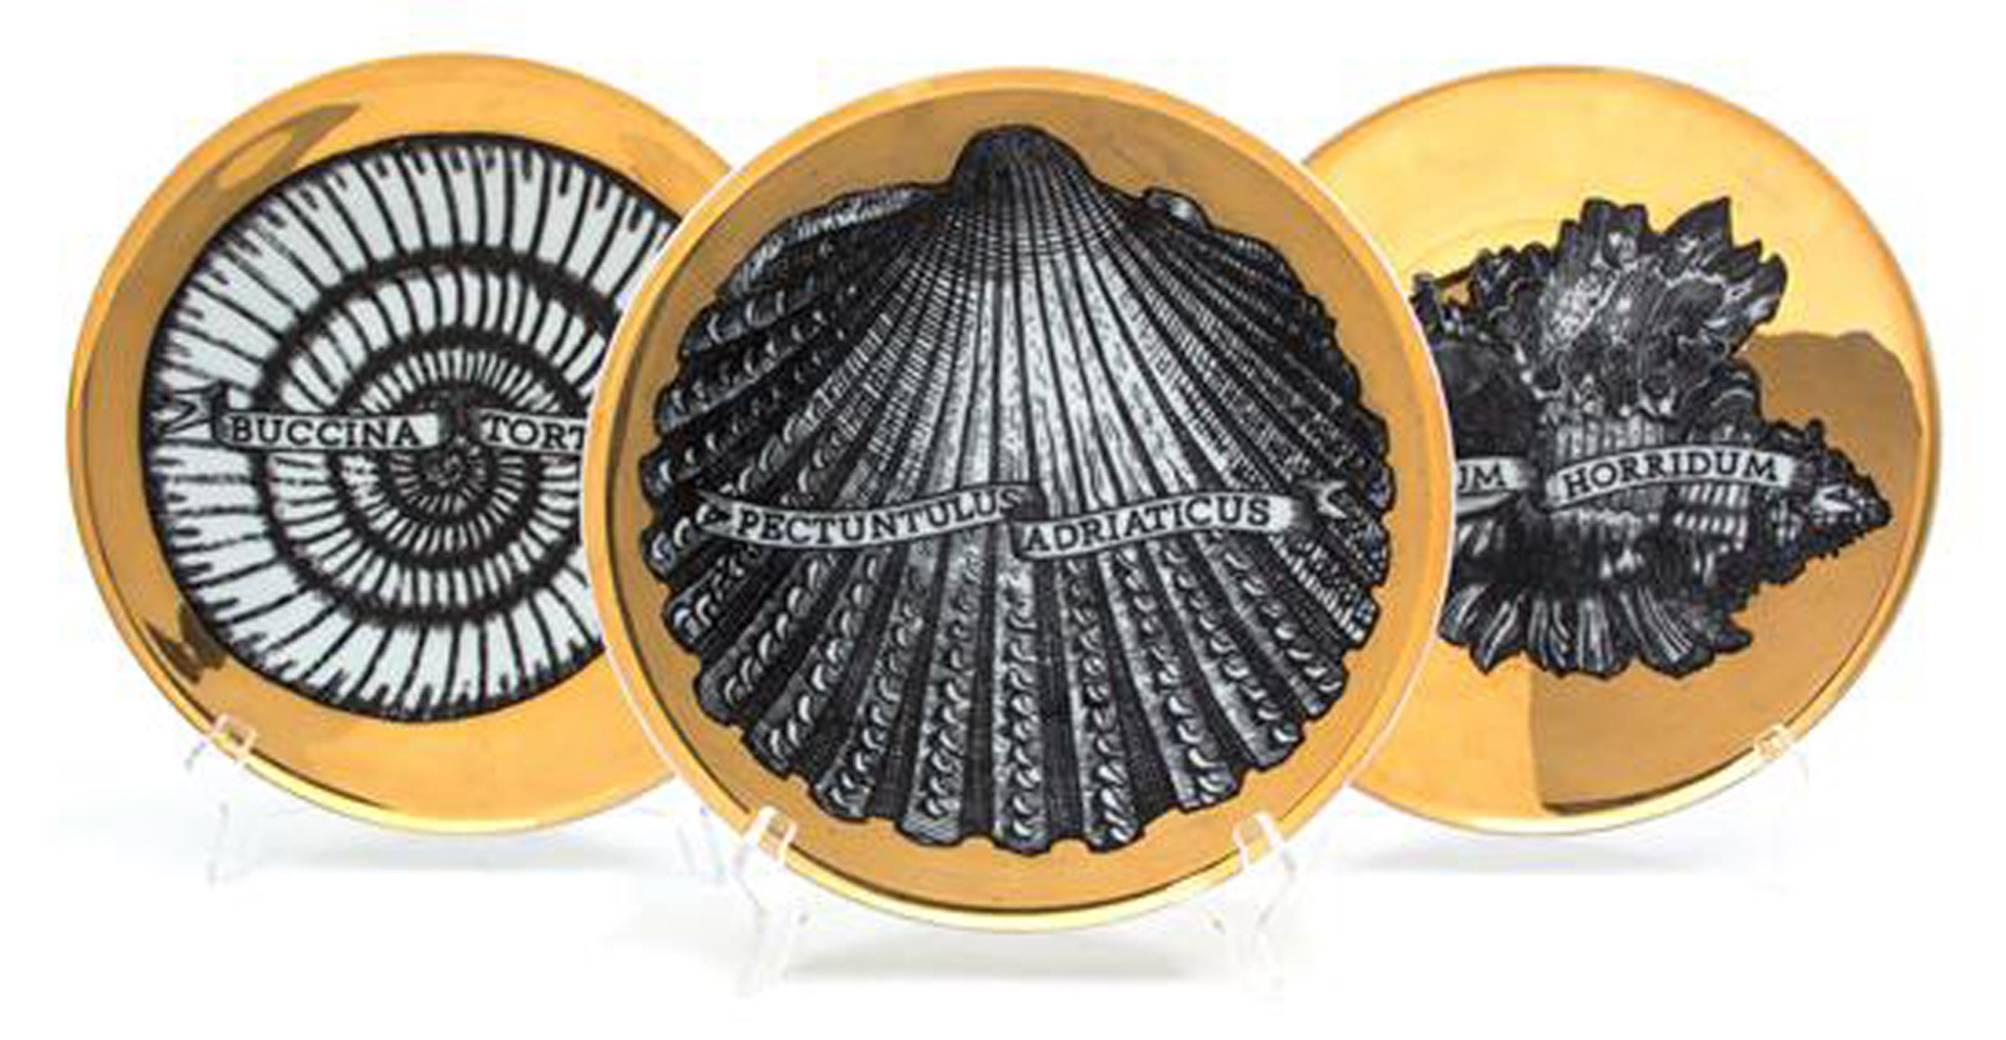 Piero Fornasetti porcelain gilt seashell porcelain plates,
Conchyliorum pattern,
Set of six plates,
circa 1950s.

The set of plates with a gilt ground and each beautifully decorated with a different large named seashell in black and